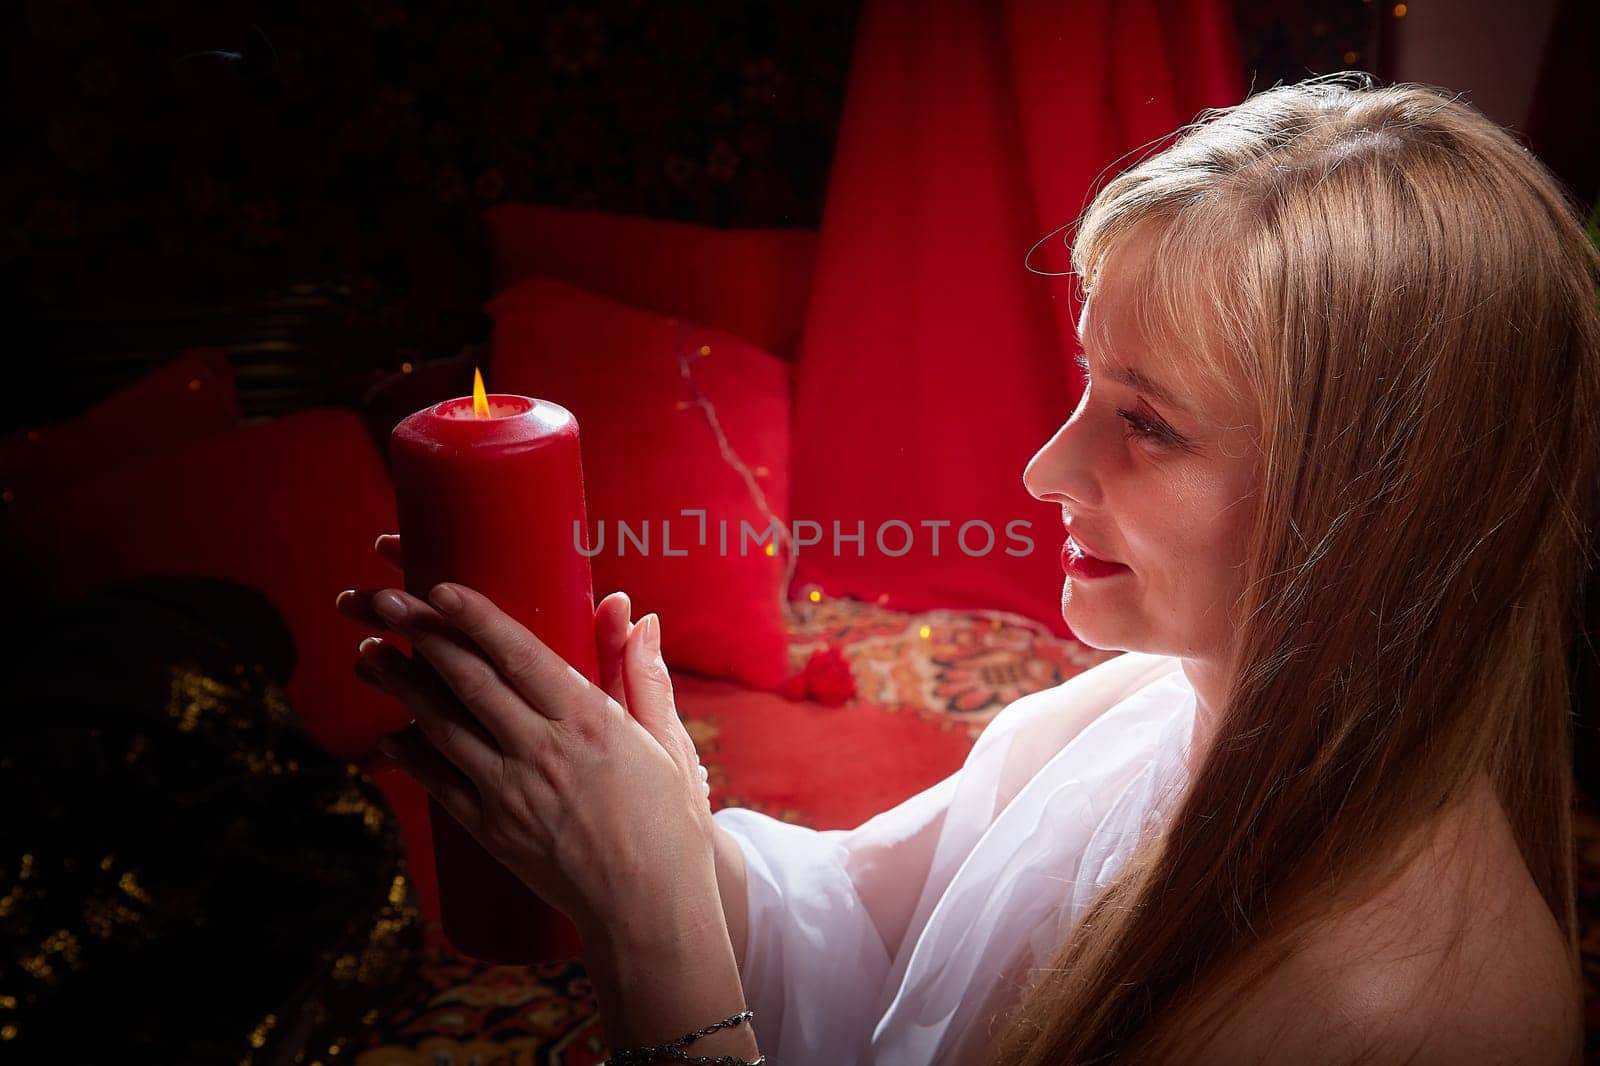 Beautiful arabian girl with candles in red room full of rich fabrics and carpets in sultan harem. Photo shoot of woman an oriental style odalisque. Model poses in sari as a caring wife and hostess by keleny